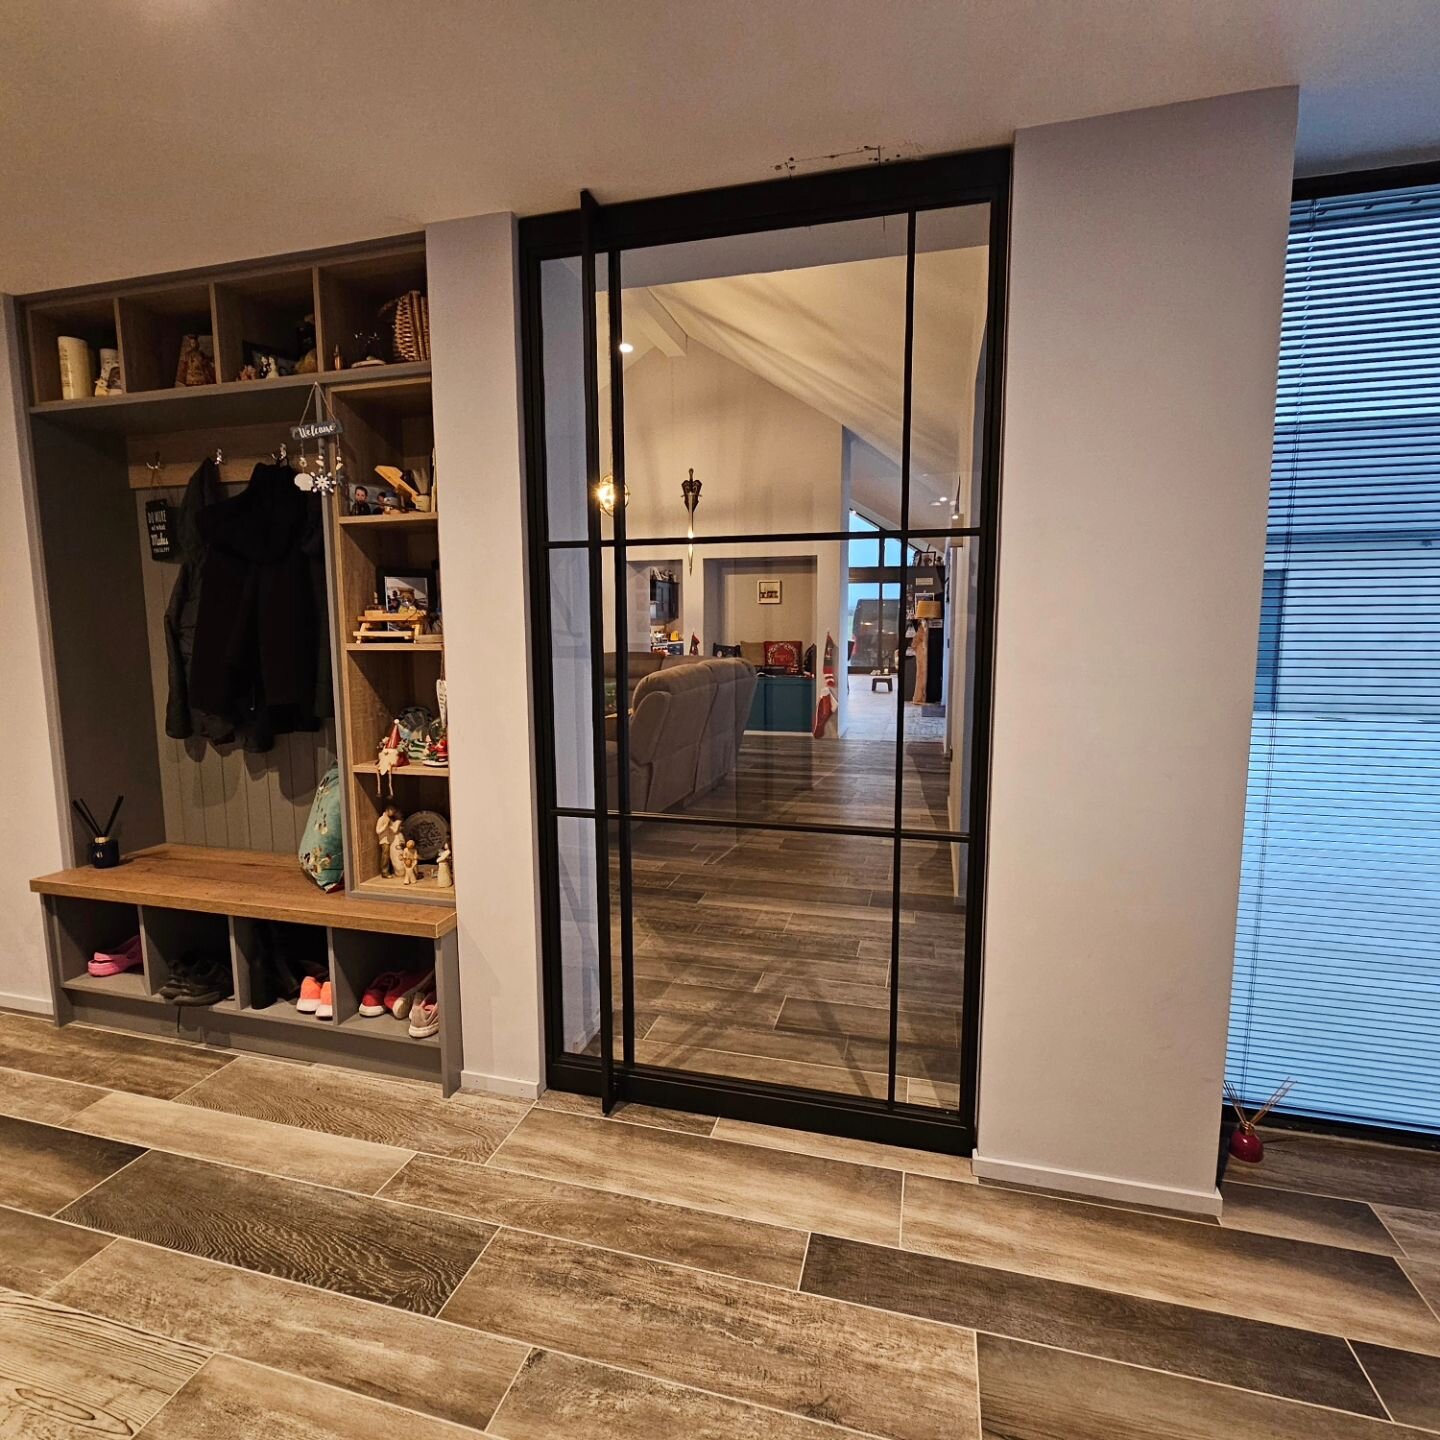 Pivot door install in our home county of Sligo. 

Dimensions 1170 x 2300 mm 

These doors are incredibly versatile! They can be made in any sizes, from standard to oversized. Plus, they operate so smoothly with a self-closing function.

This build is